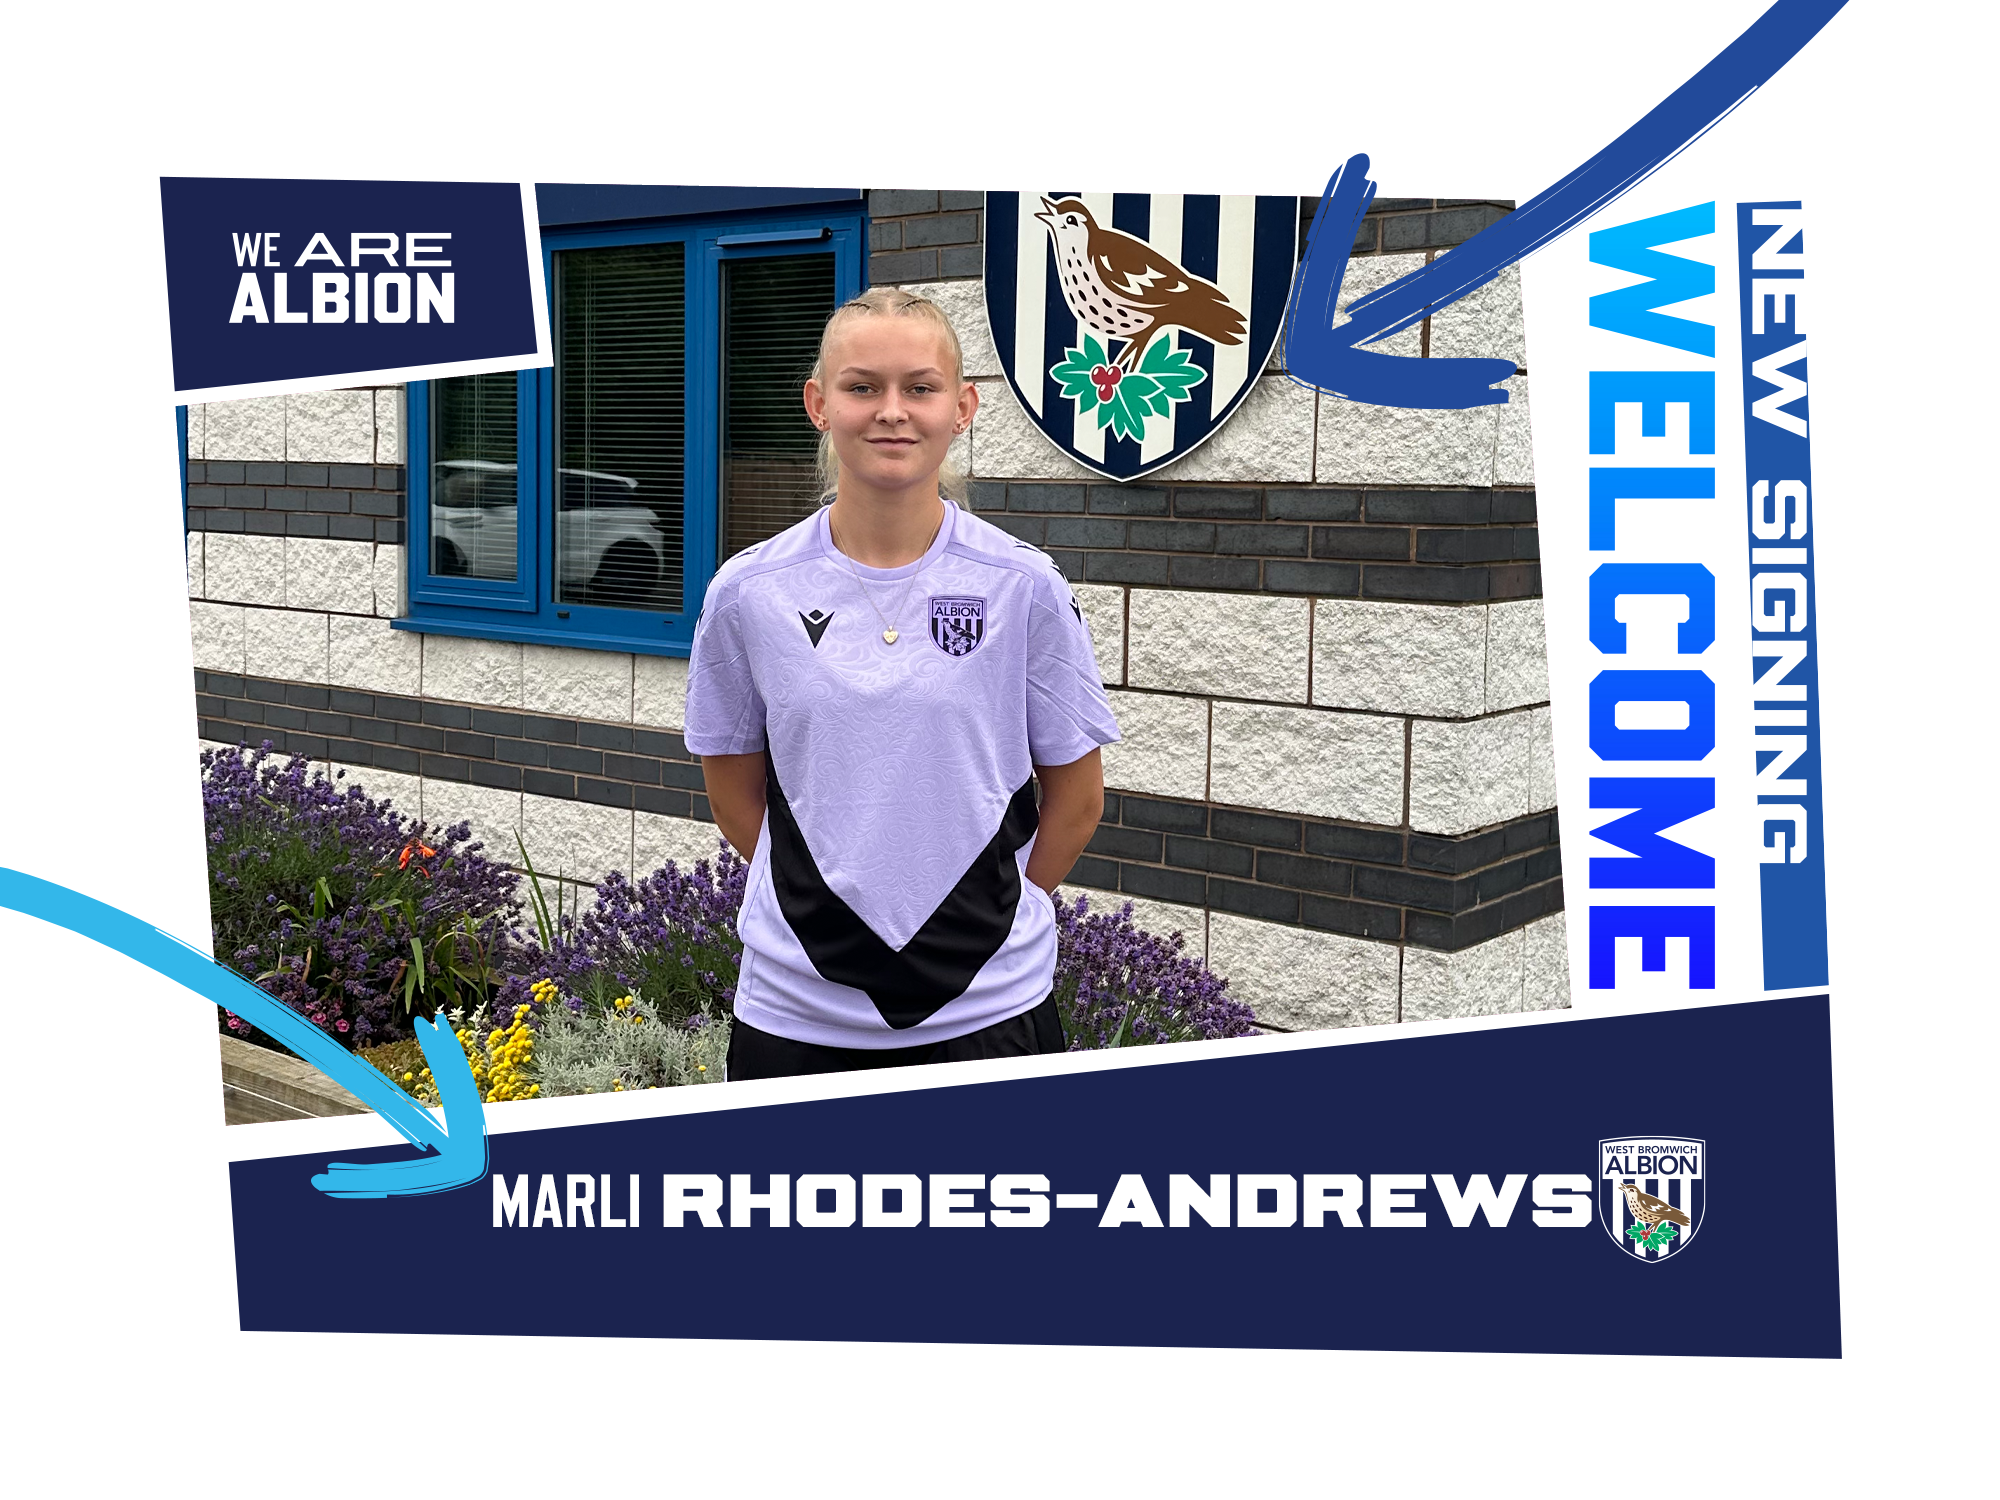 A graphic displaying Marli Rhodes-Andrews as Albion Women's new signing